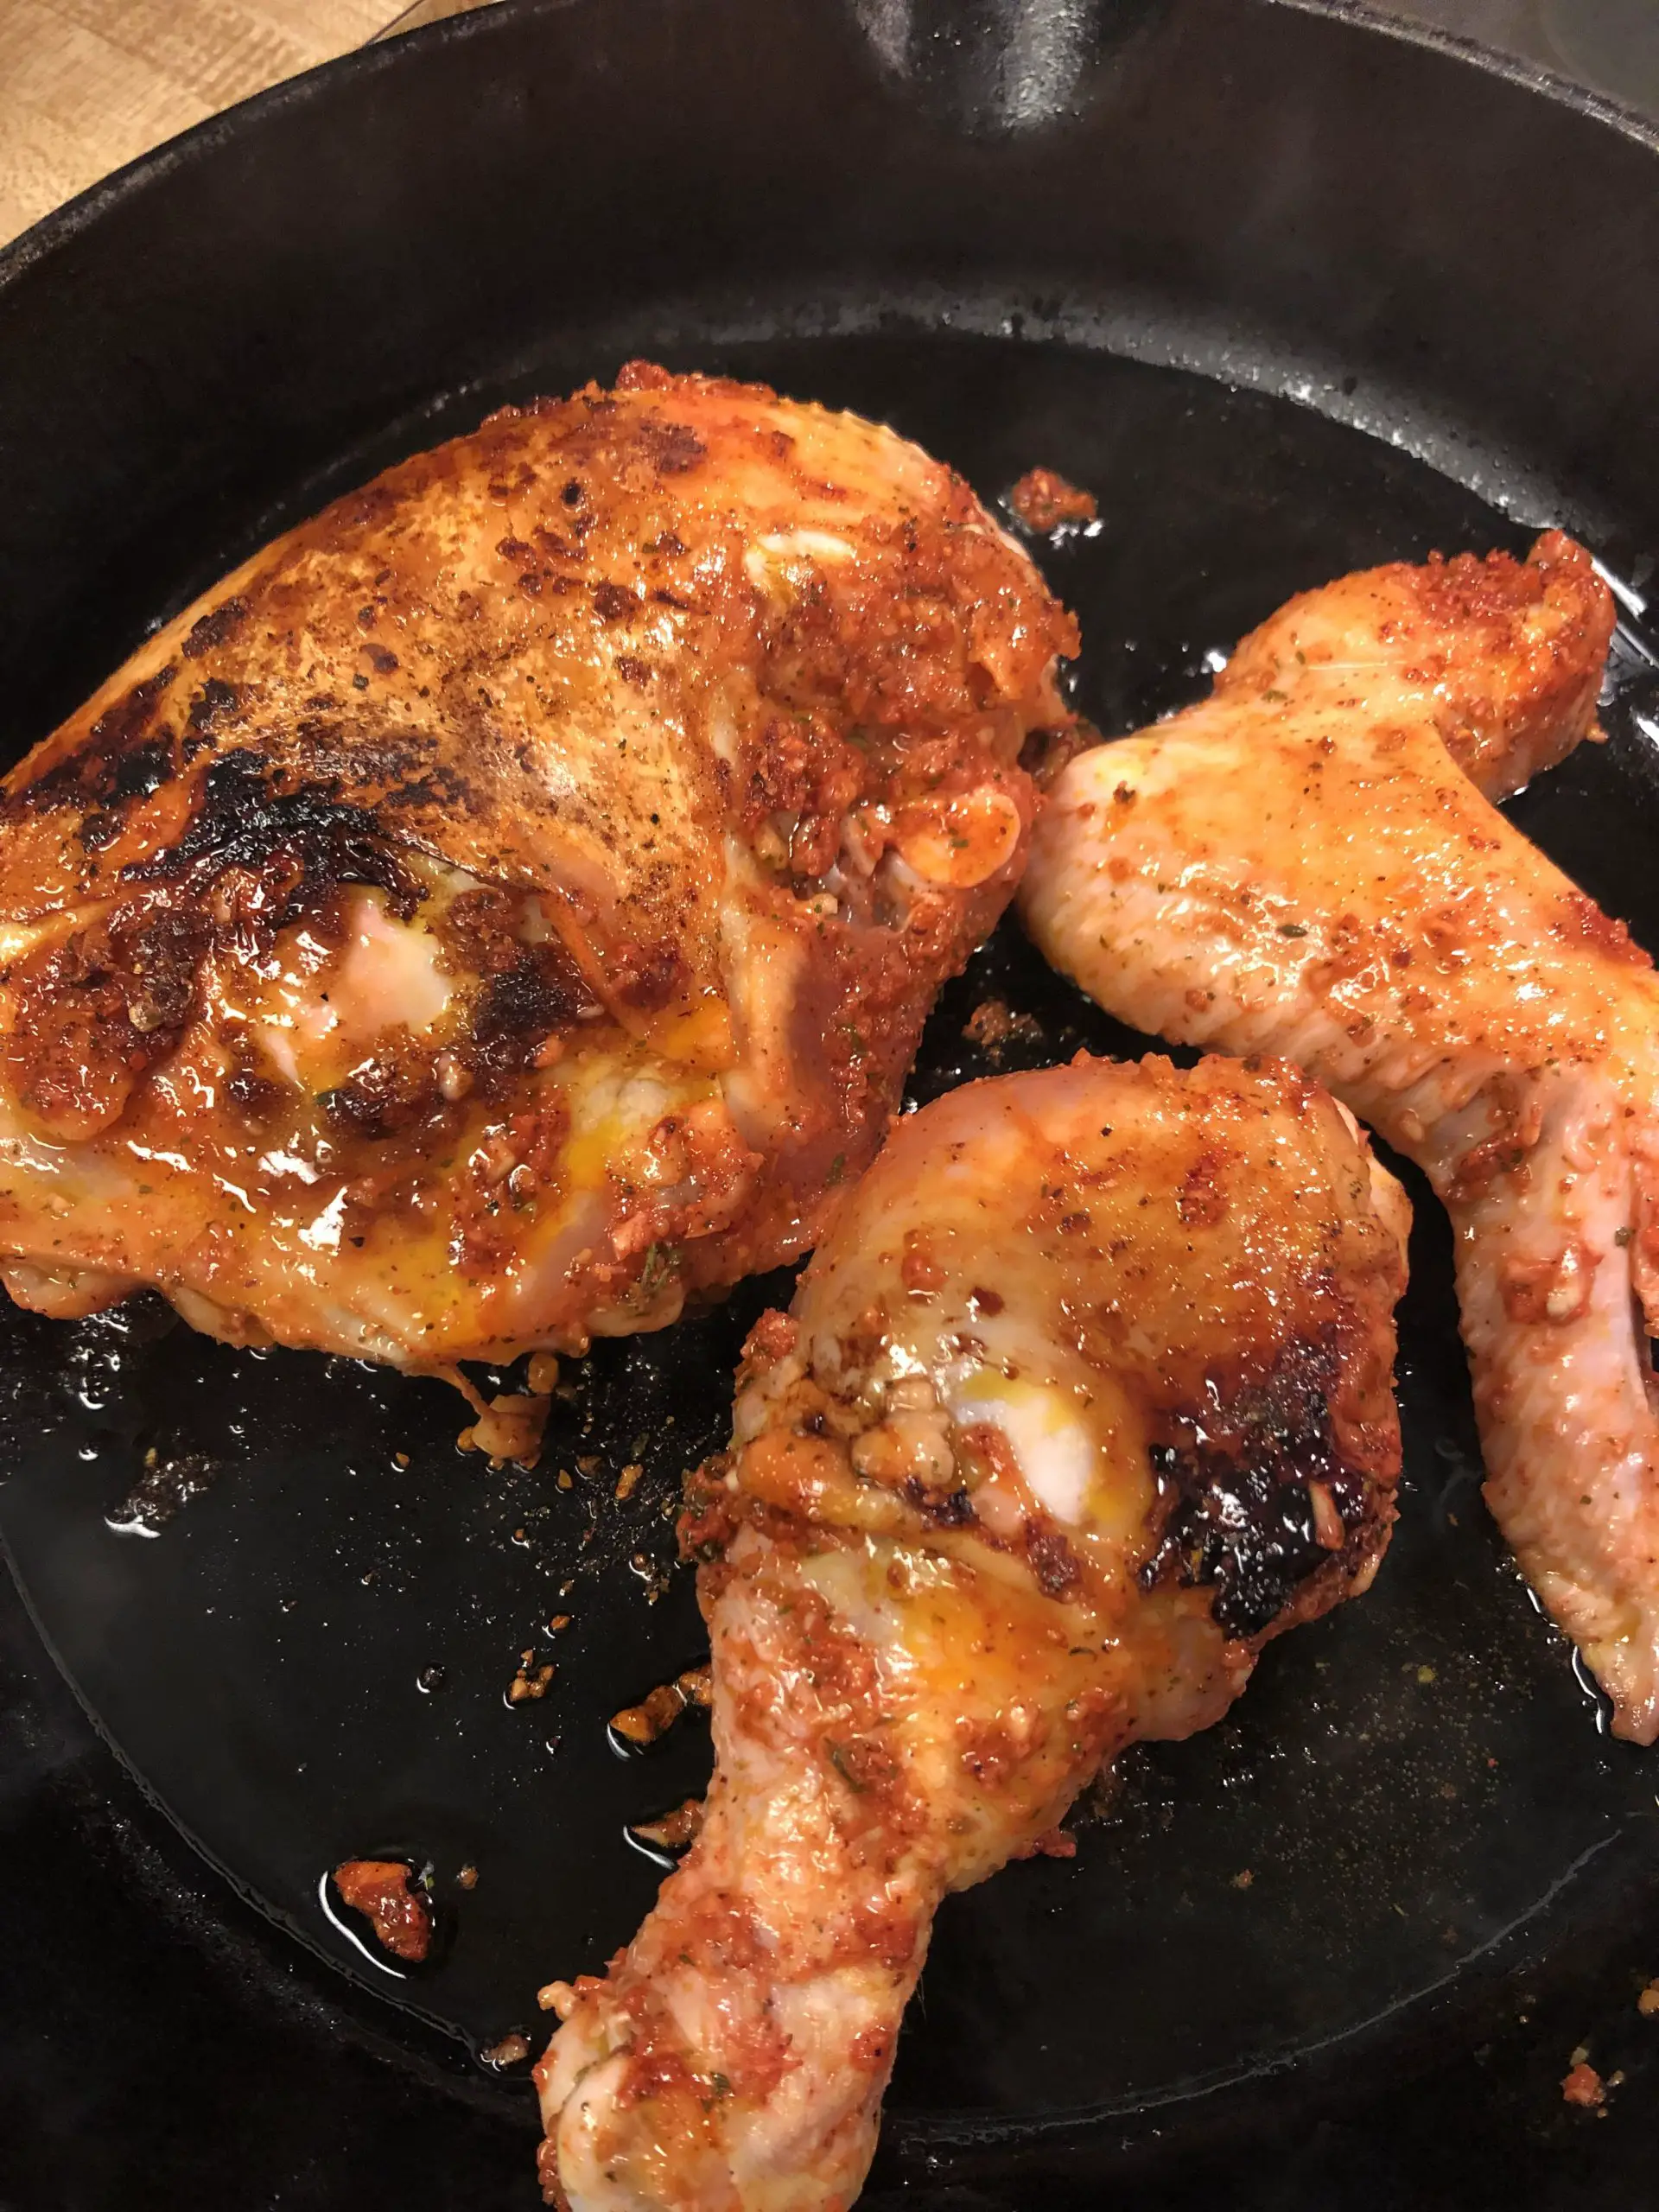 Pieces of chicken frying in a cast iron pan